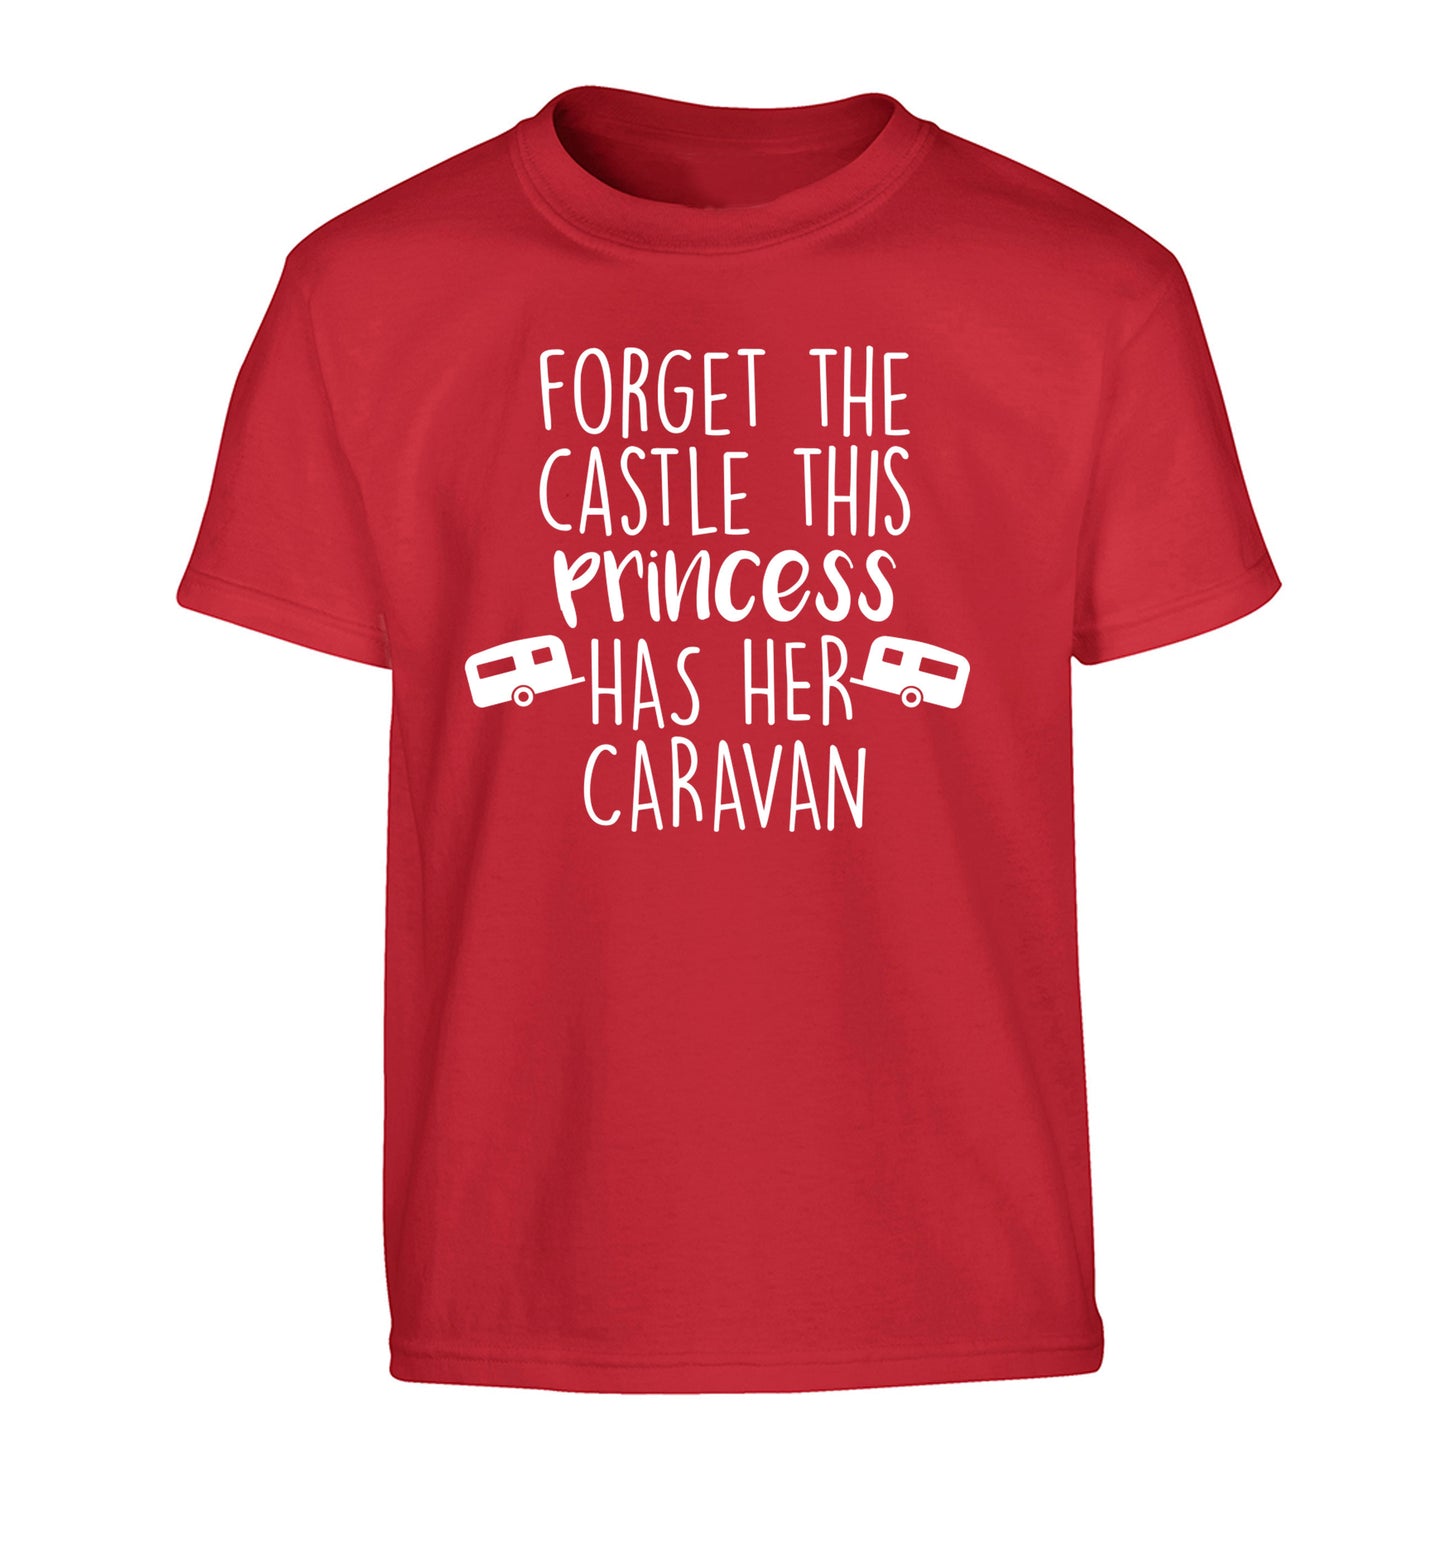 Forget the castle this princess lives at the caravan Children's red Tshirt 12-14 Years